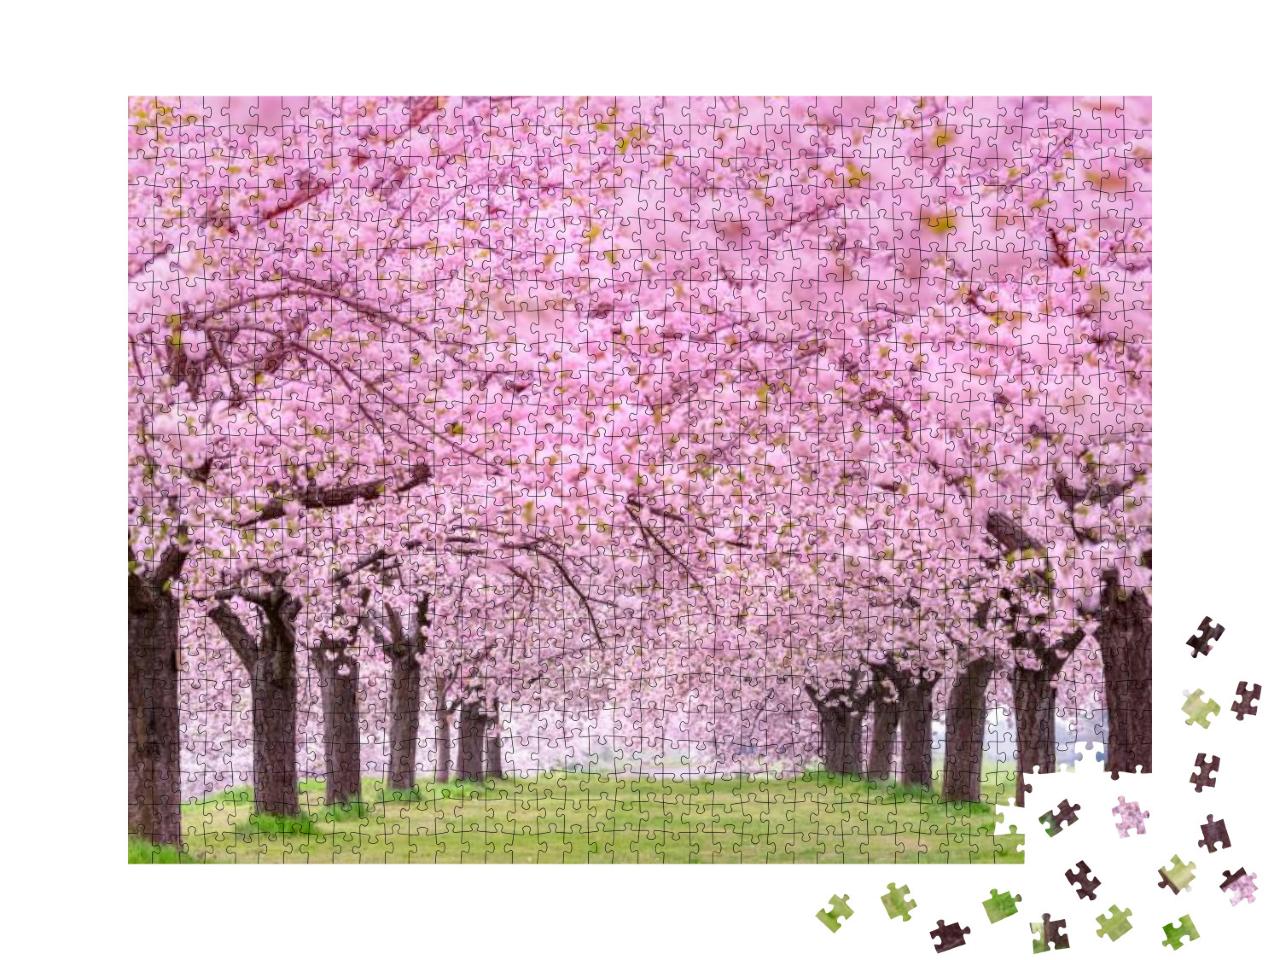 Beautiful Cherry Blossoms. Japan Obuse-Machi, Nagano Pref... Jigsaw Puzzle with 1000 pieces